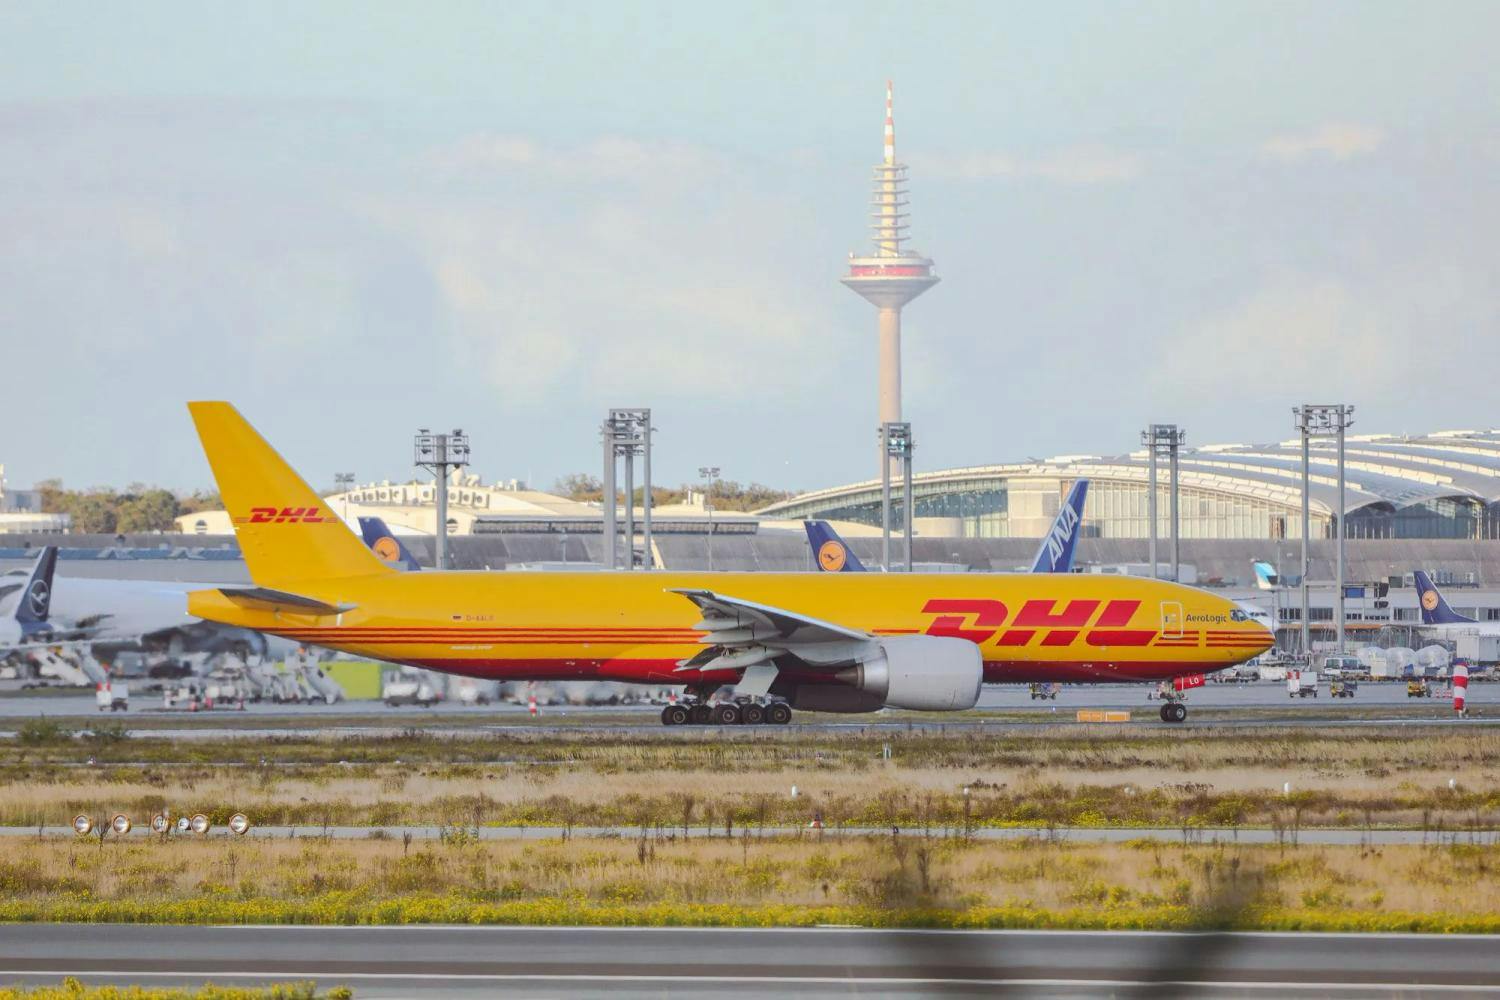 How does DHL’s “On Demand Delivery” make international shipping easier?